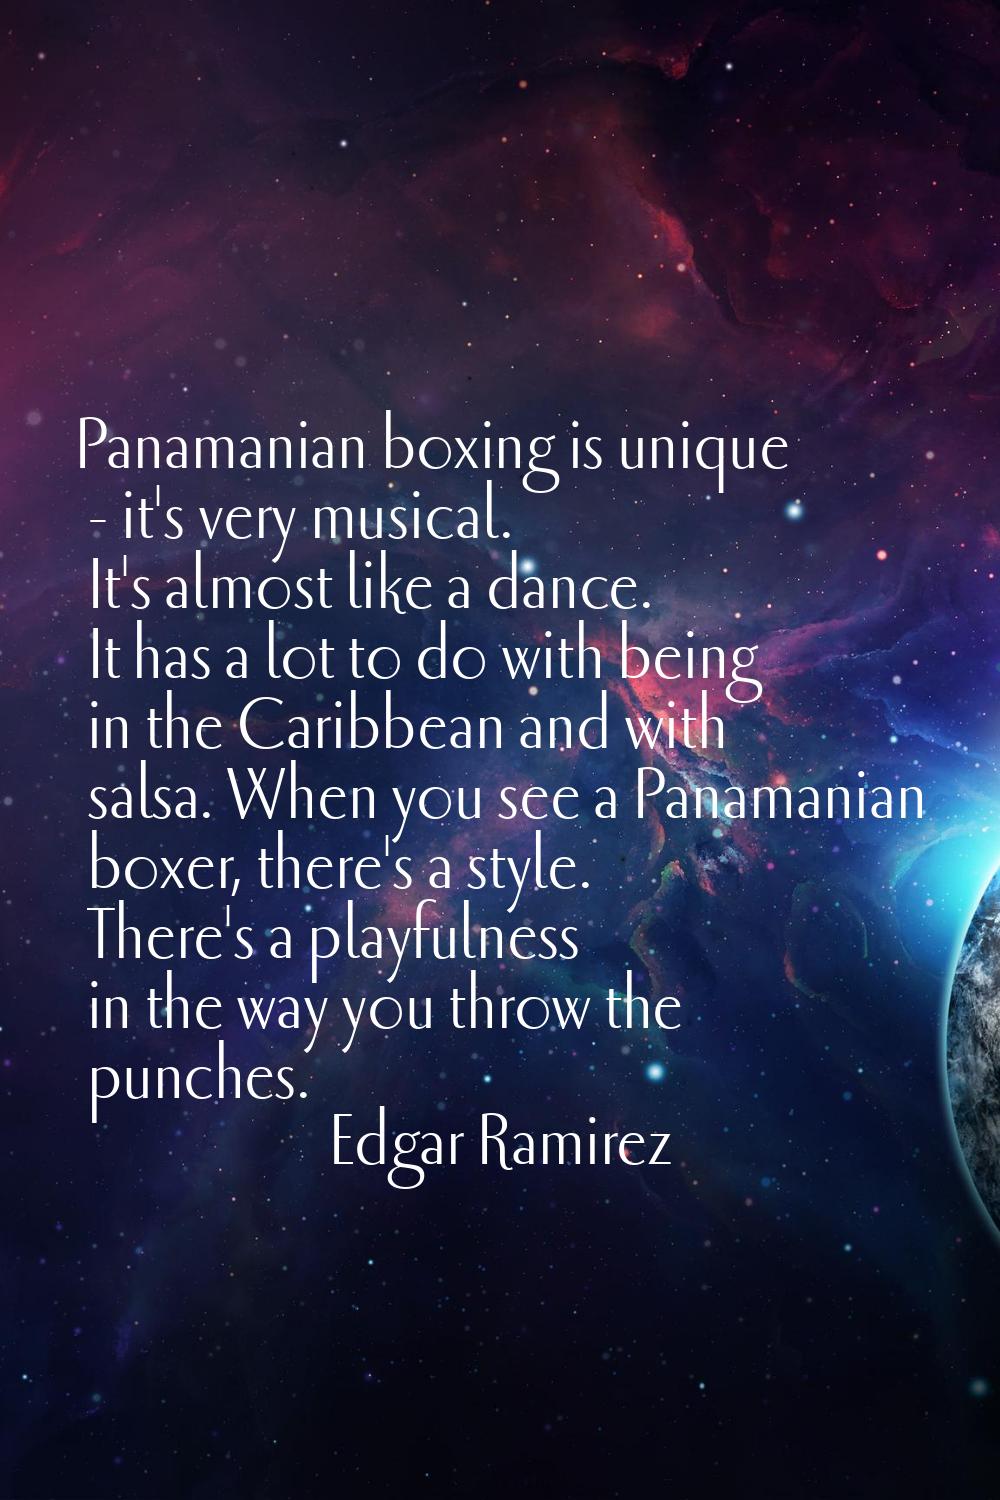 Panamanian boxing is unique - it's very musical. It's almost like a dance. It has a lot to do with 